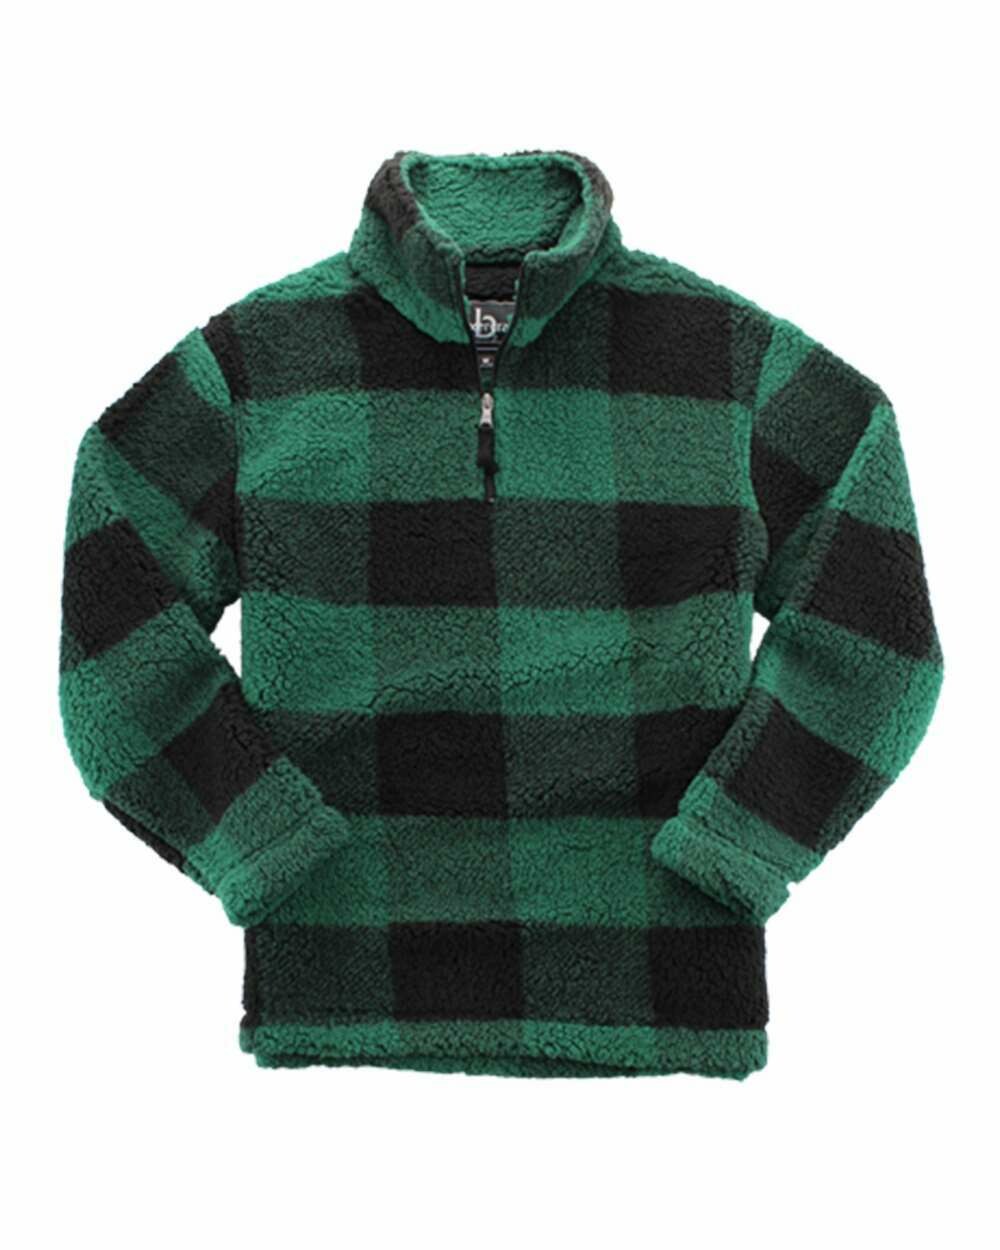 Unisex Plaid Sherpa Fleece Quarter-Zip Pullover with choice of logo